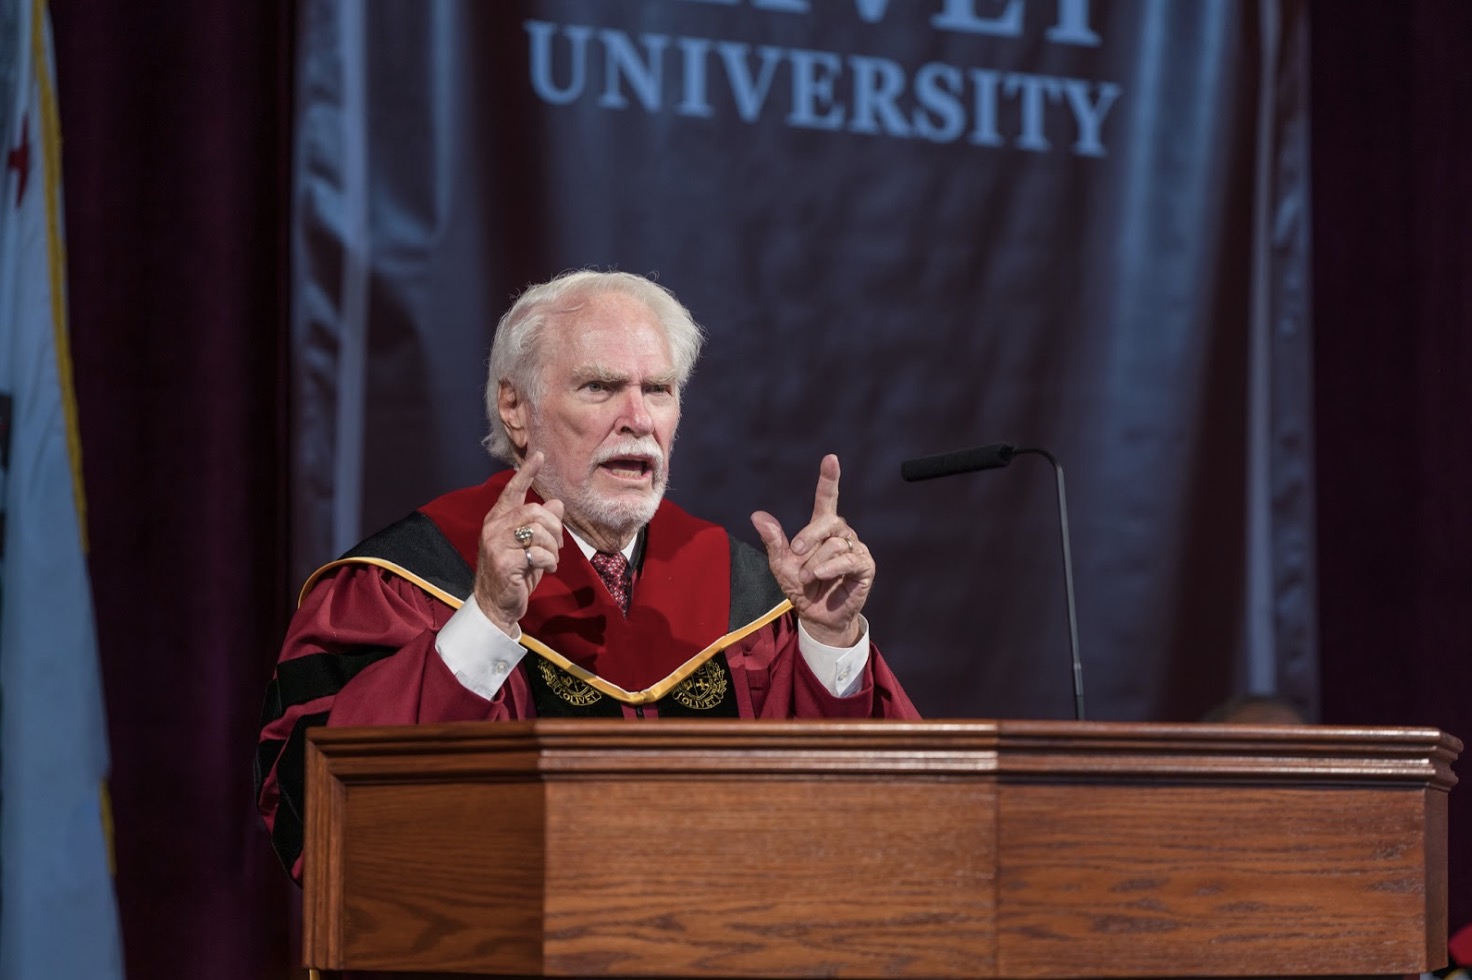 2022 Commencement Ceremony Offers Praise to God
